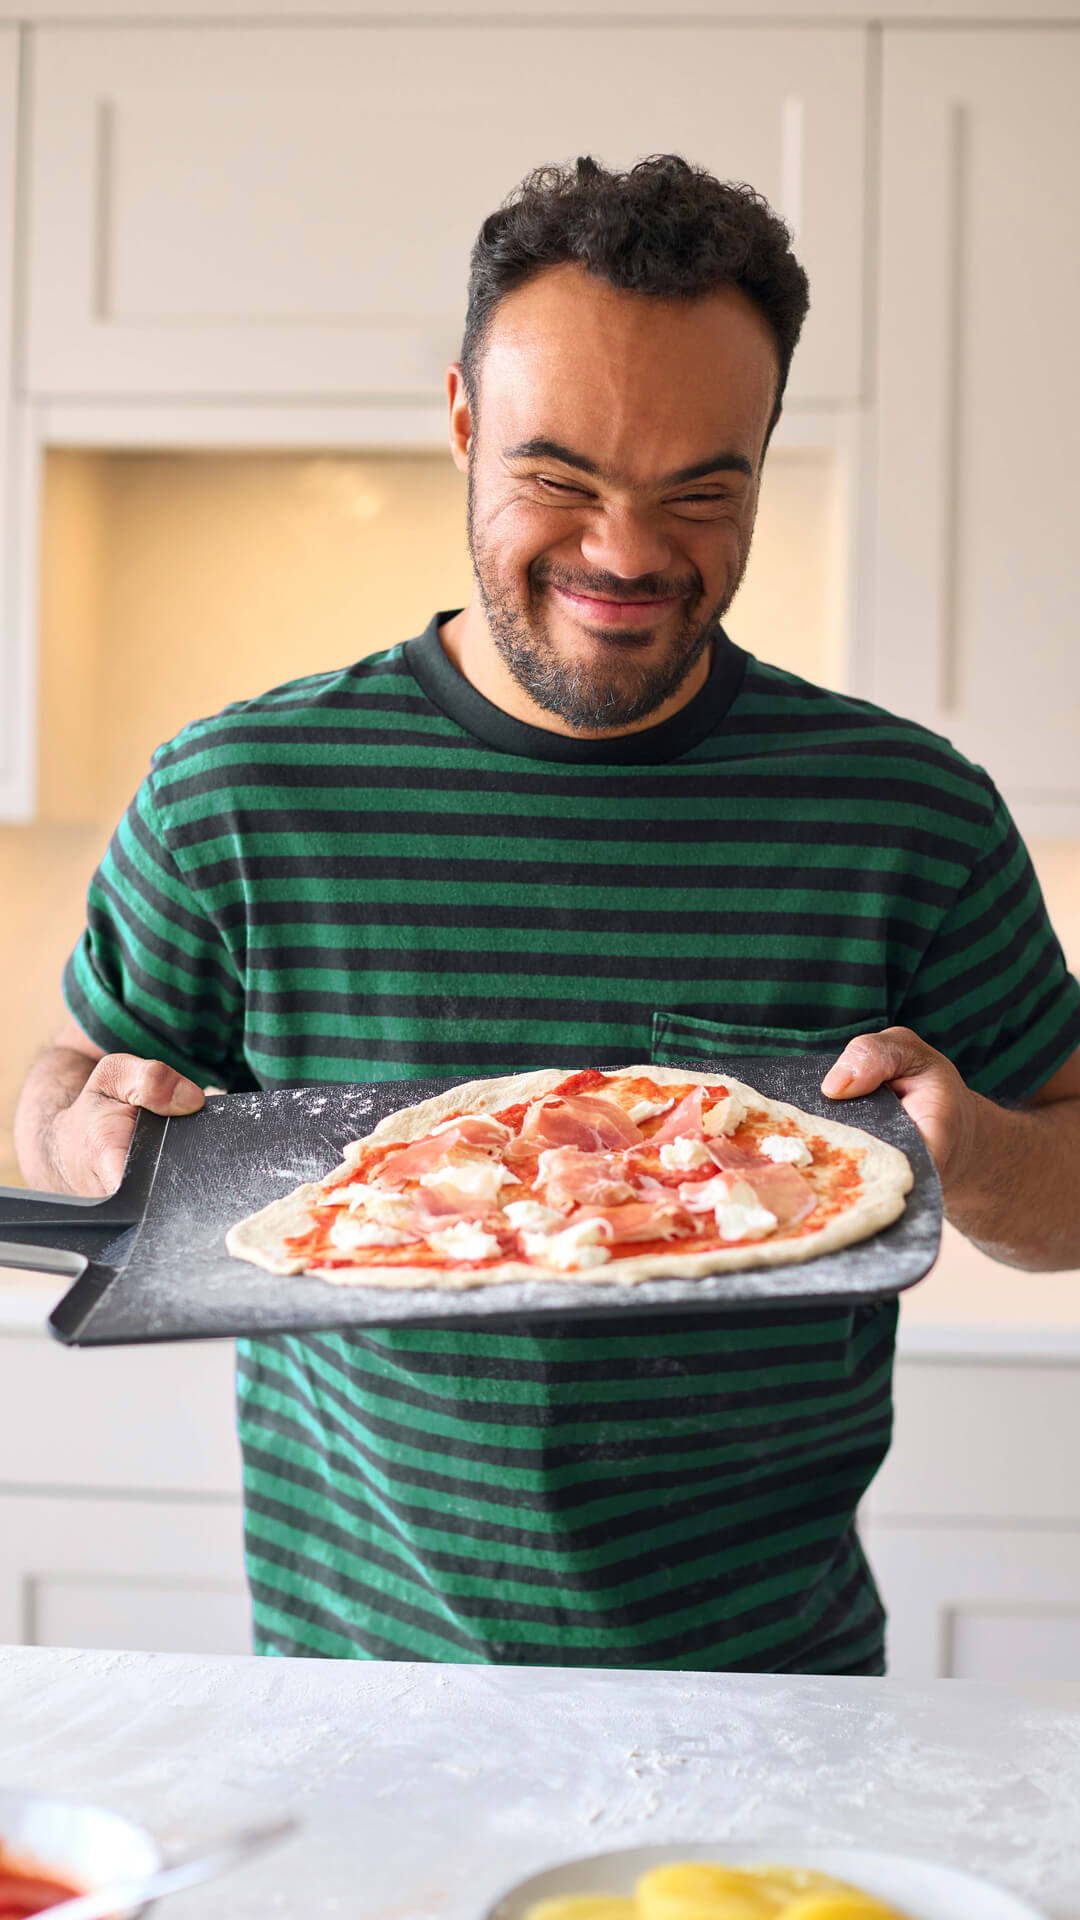 Man with pizza smiles in kitchen.